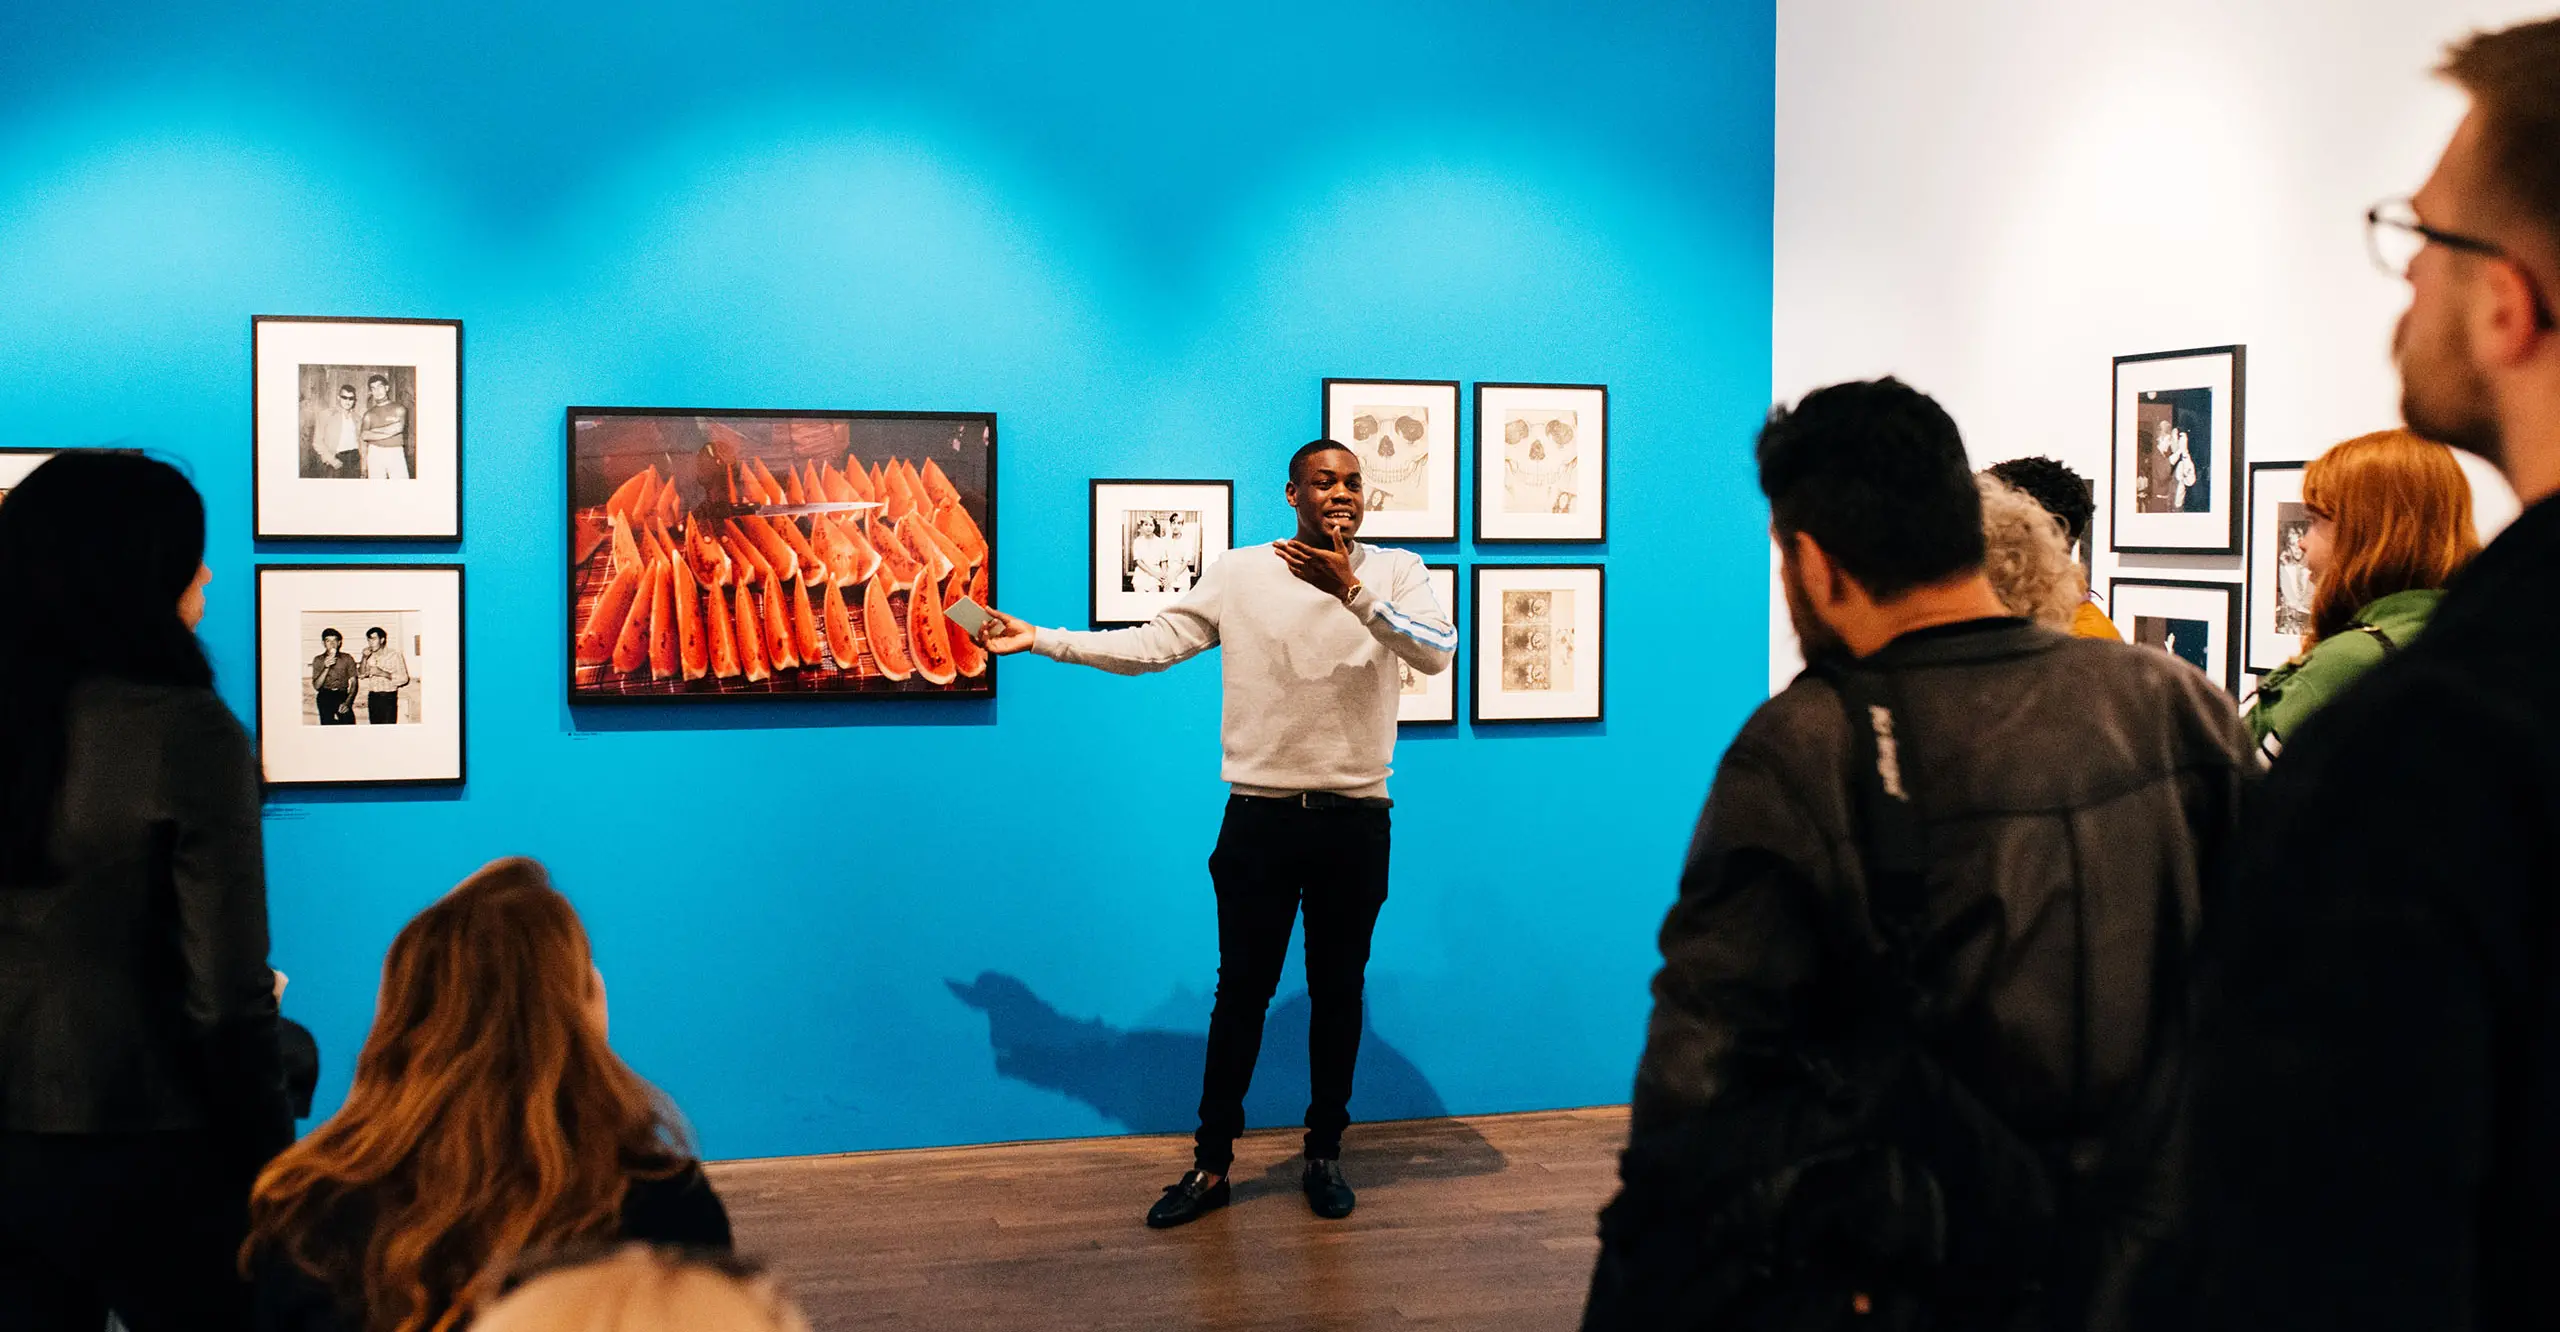 A photograph of a young person speaking to a group of people in a gallery.